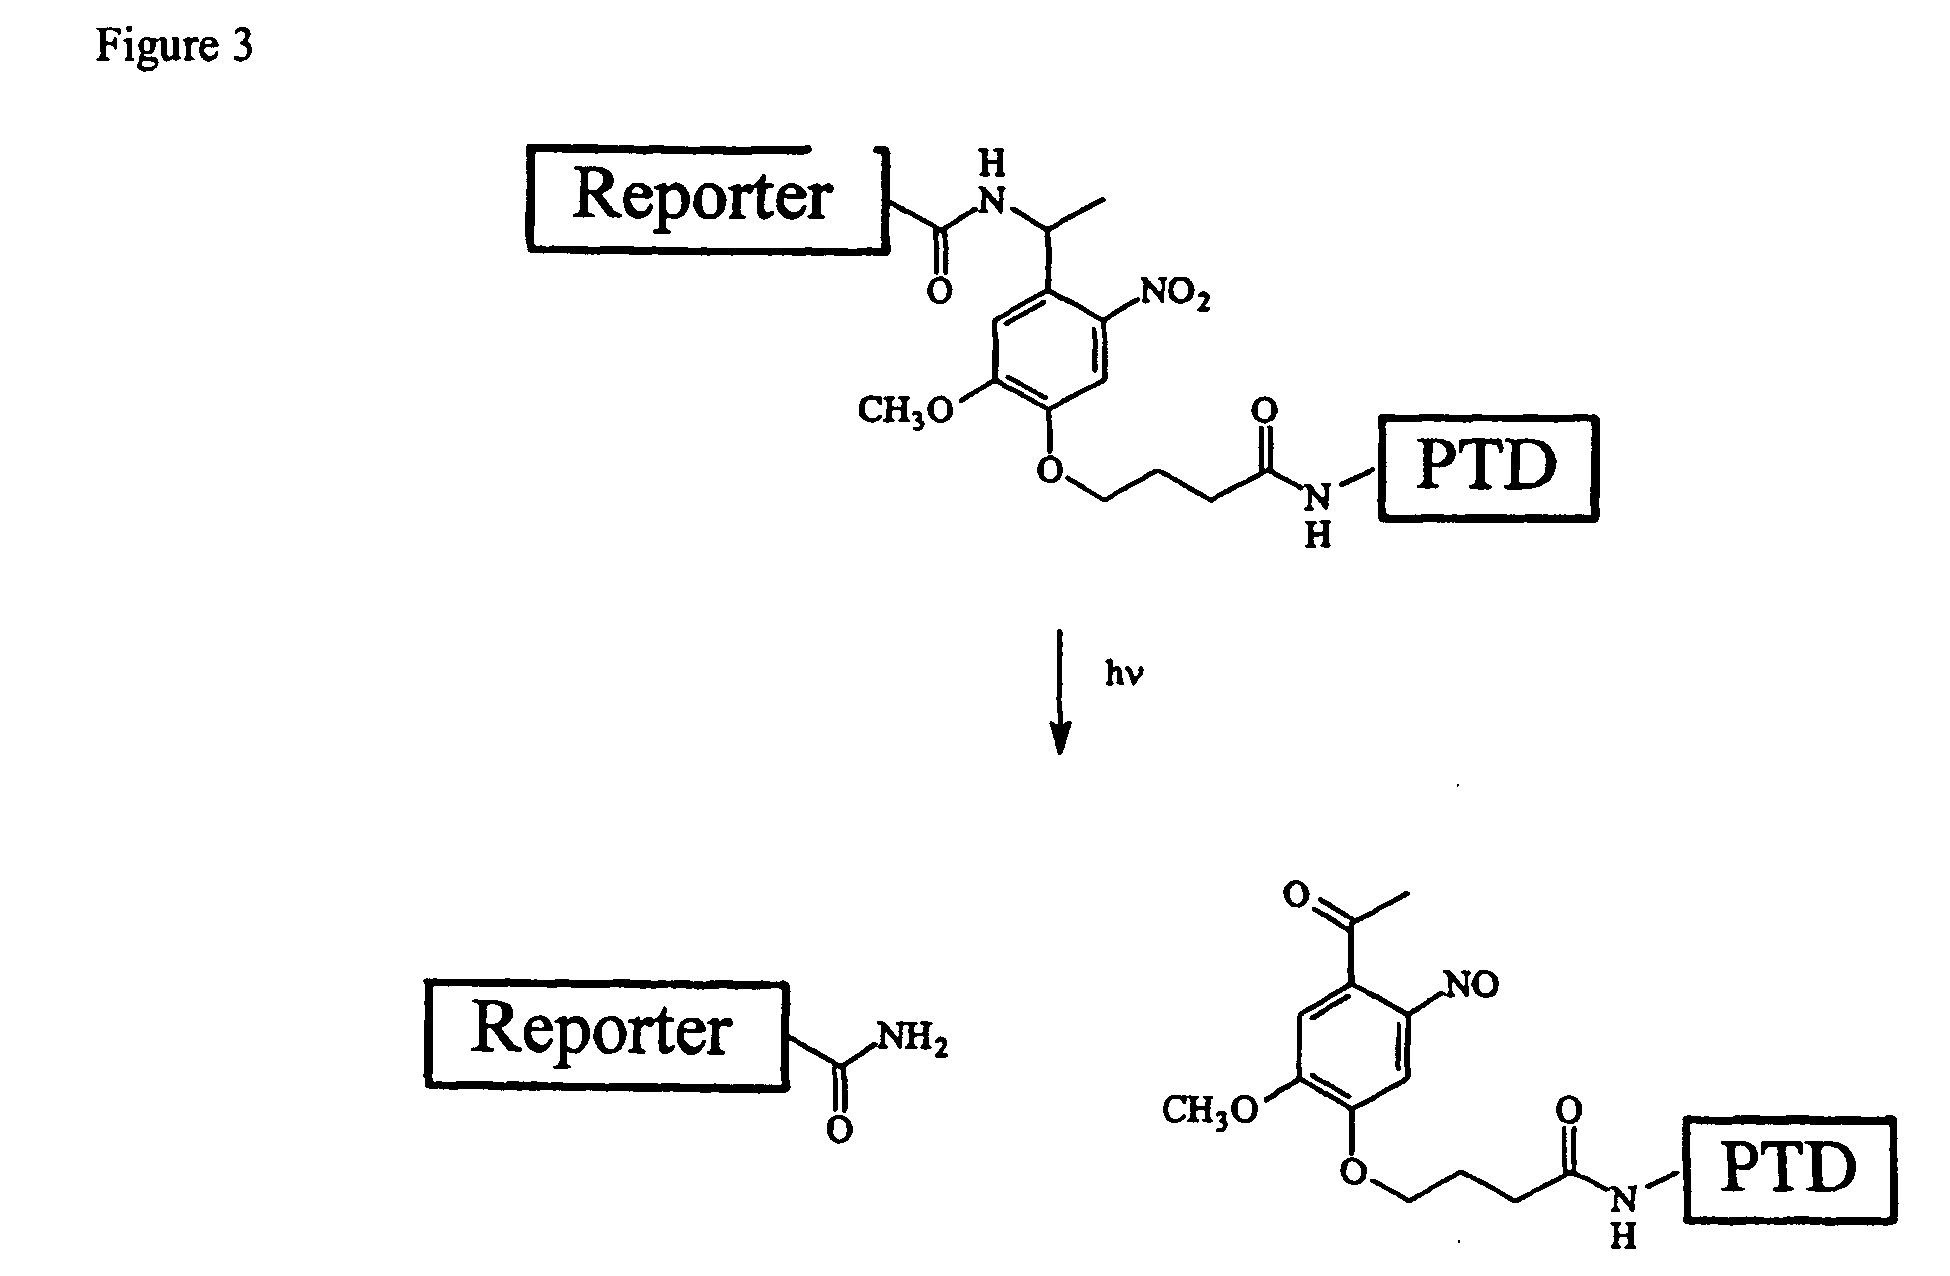 Cell-permeable enzyme activation reporter that can be loaded in a high throughput and gentle manner